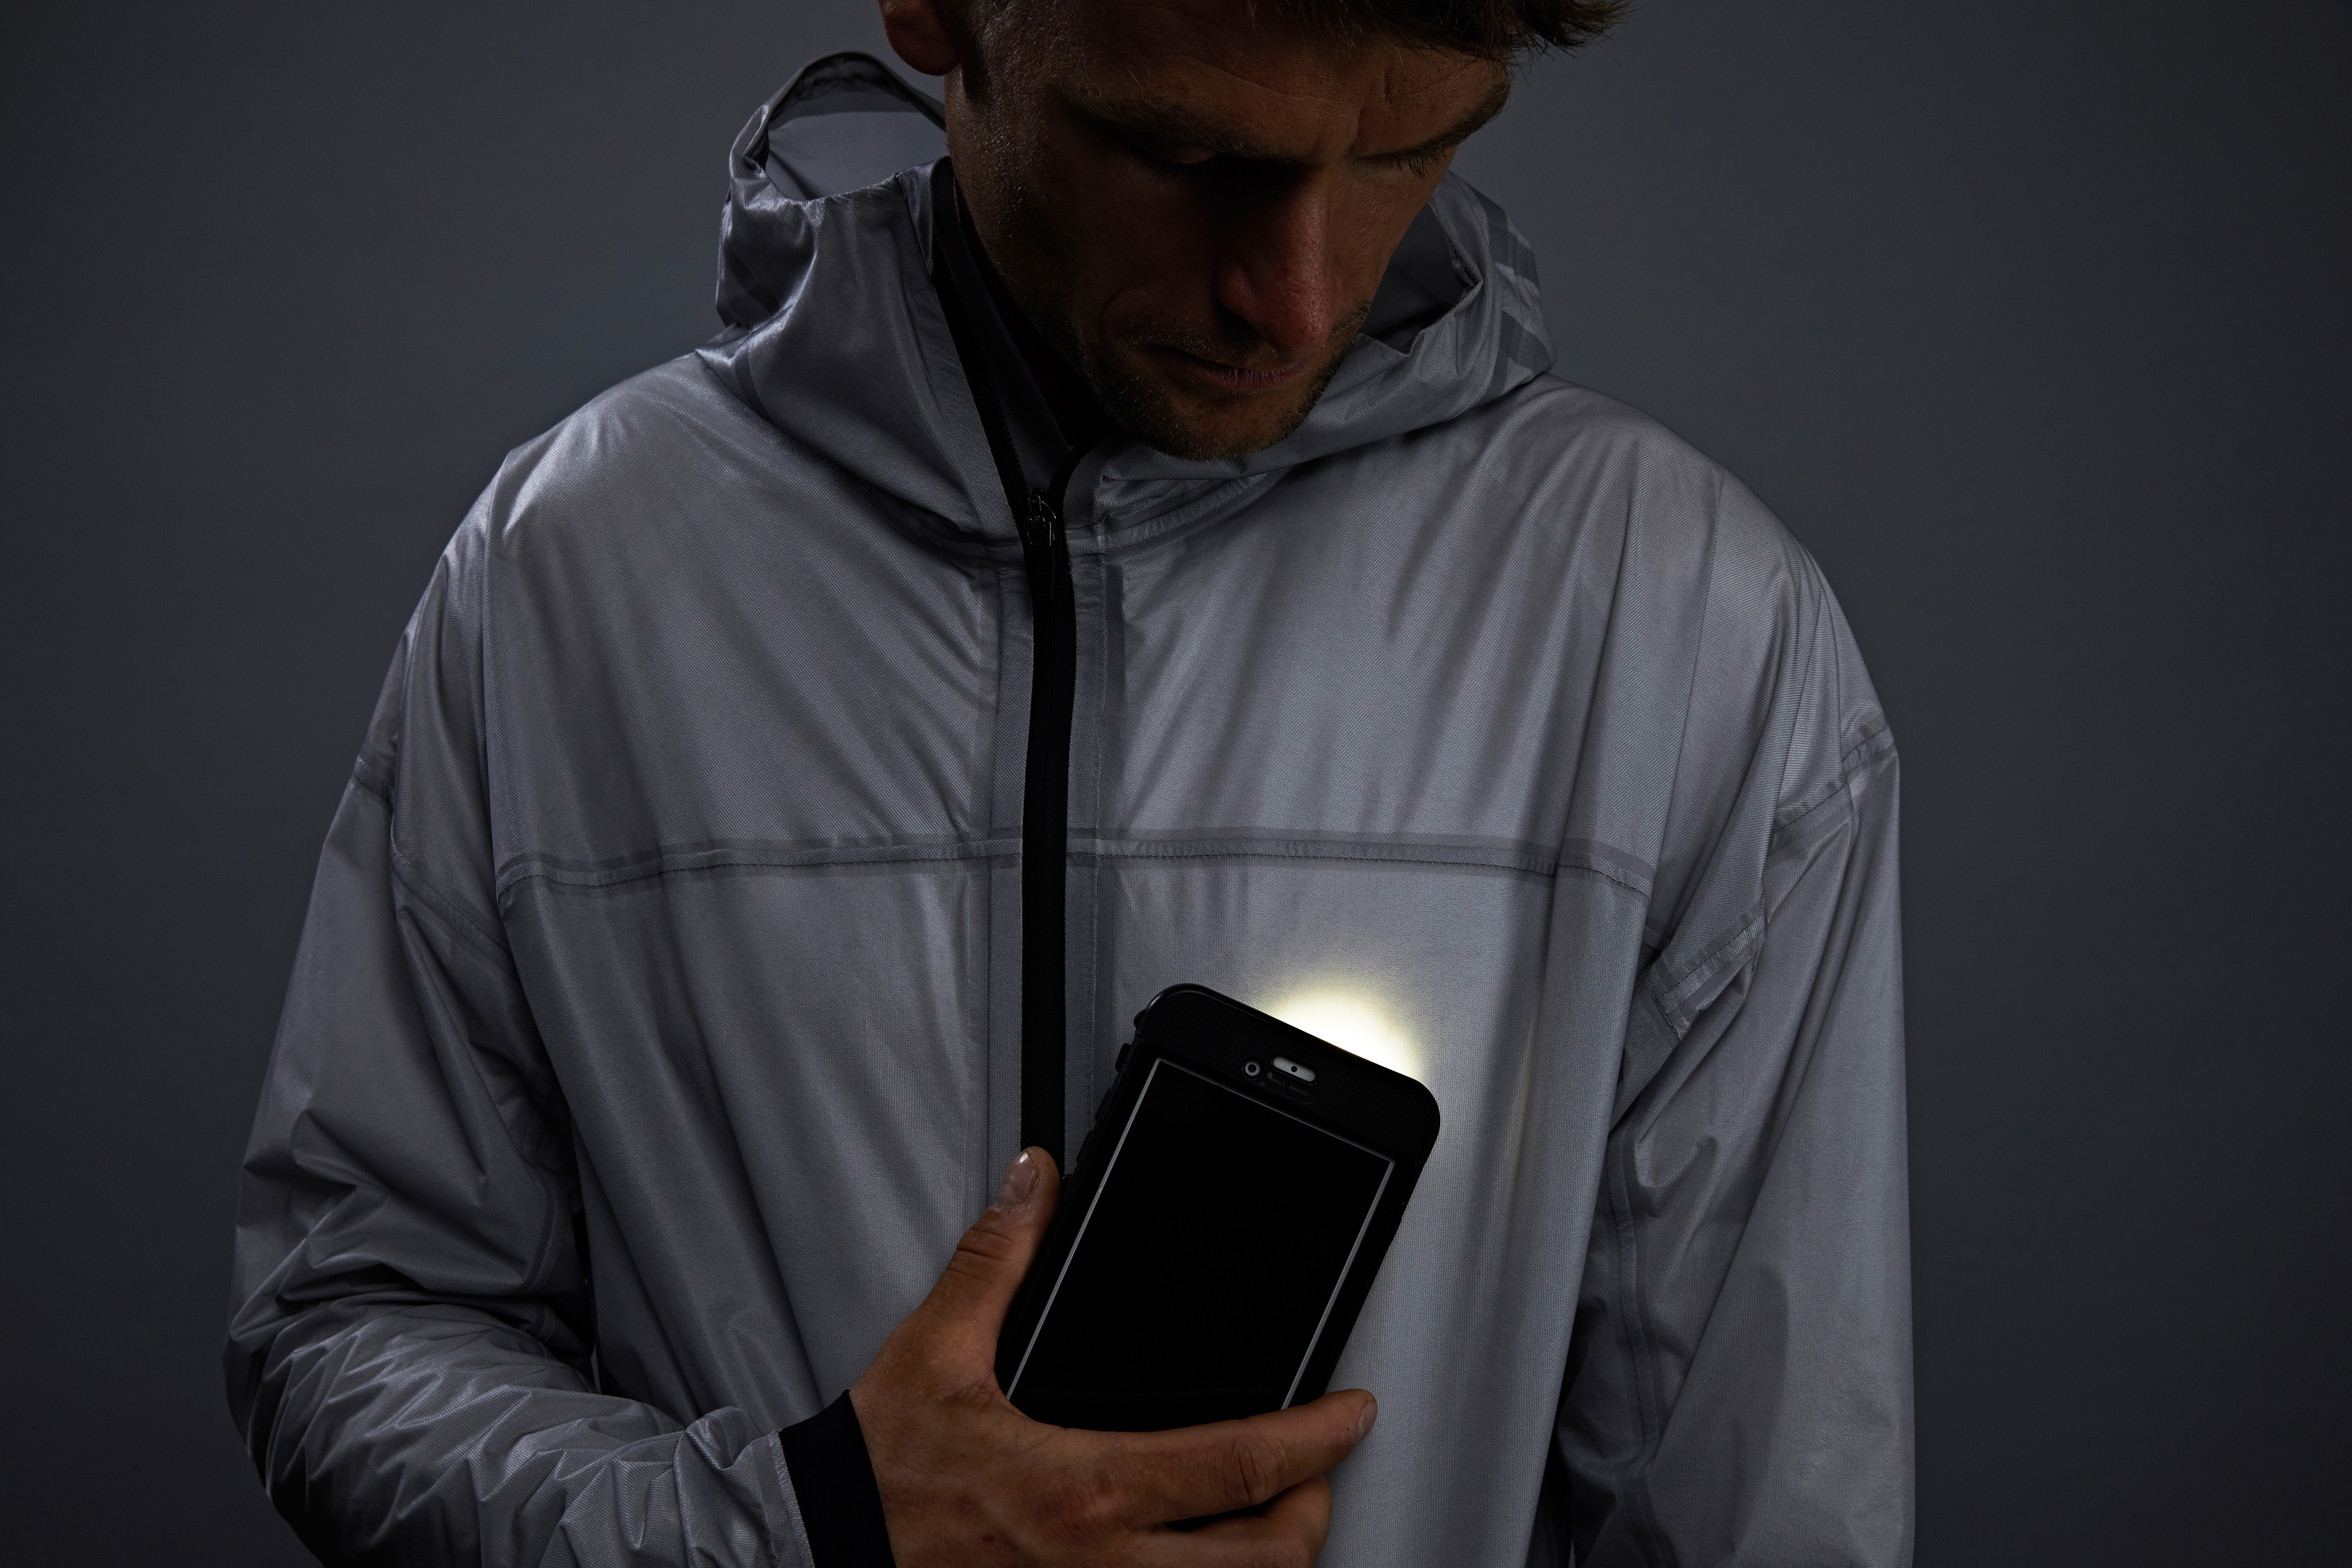 A smartphone is used to power The Solar Charged Jacket from Vollebak (Sun Lee/Vollebak)